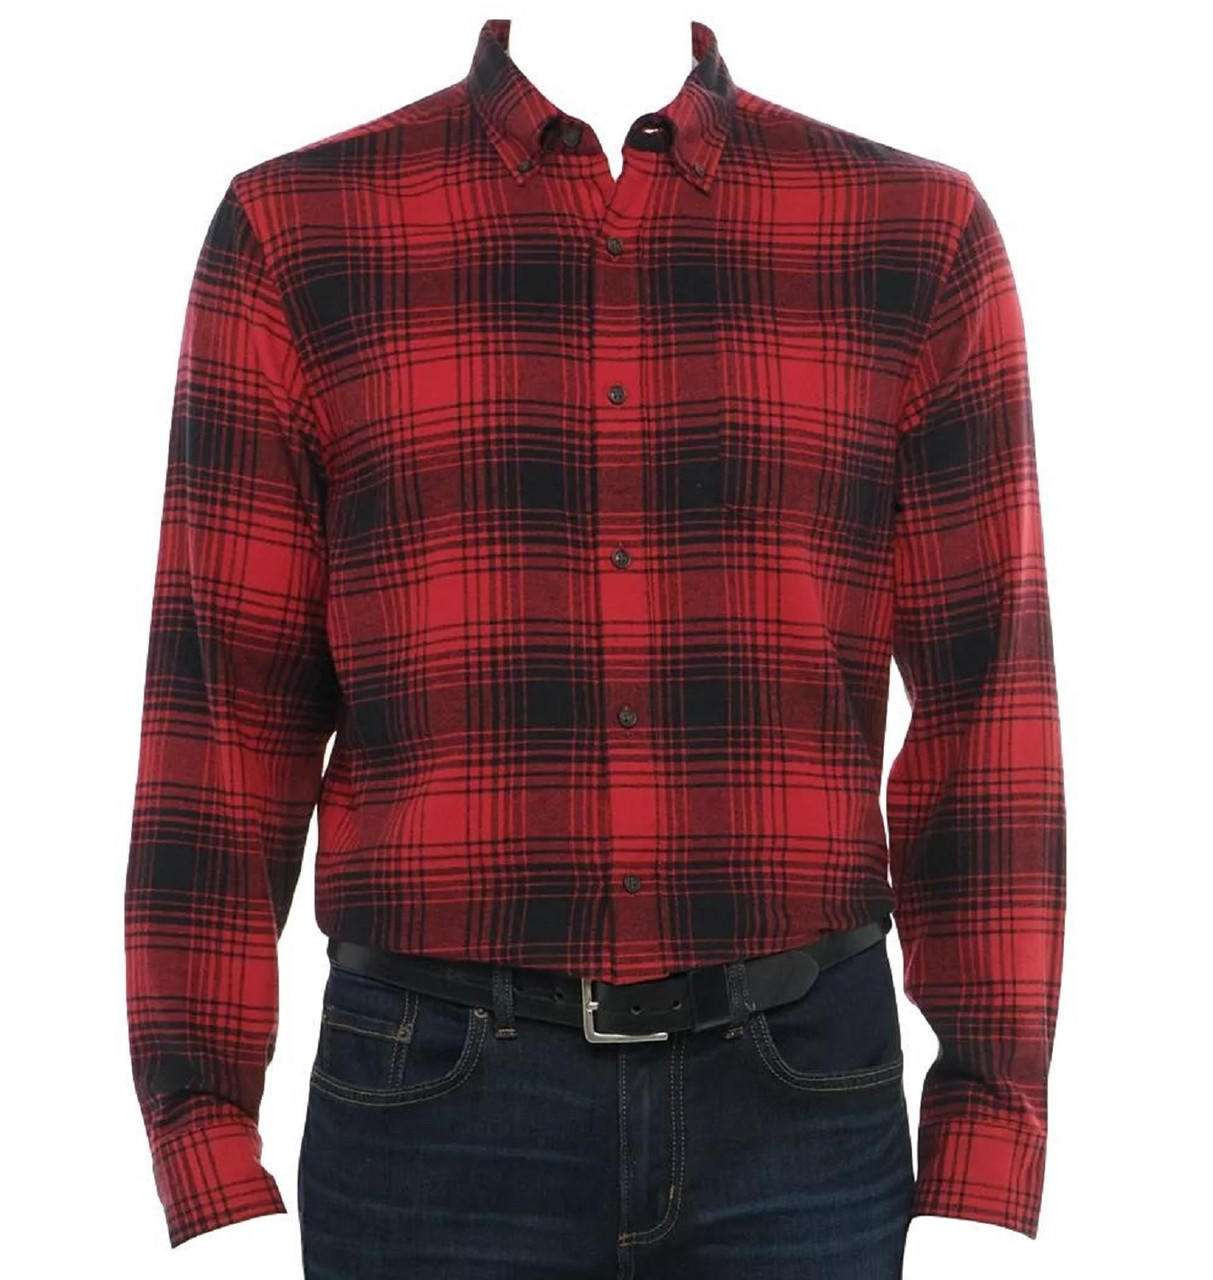 https://cdn11.bigcommerce.com/s-50a8b/images/stencil/1280x1280/products/1282/14343/benefit-wear-mens-front-hook-and-loop-closure-flannel-ls-shirt__38477_12569__64674.1707663636.jpg?c=2